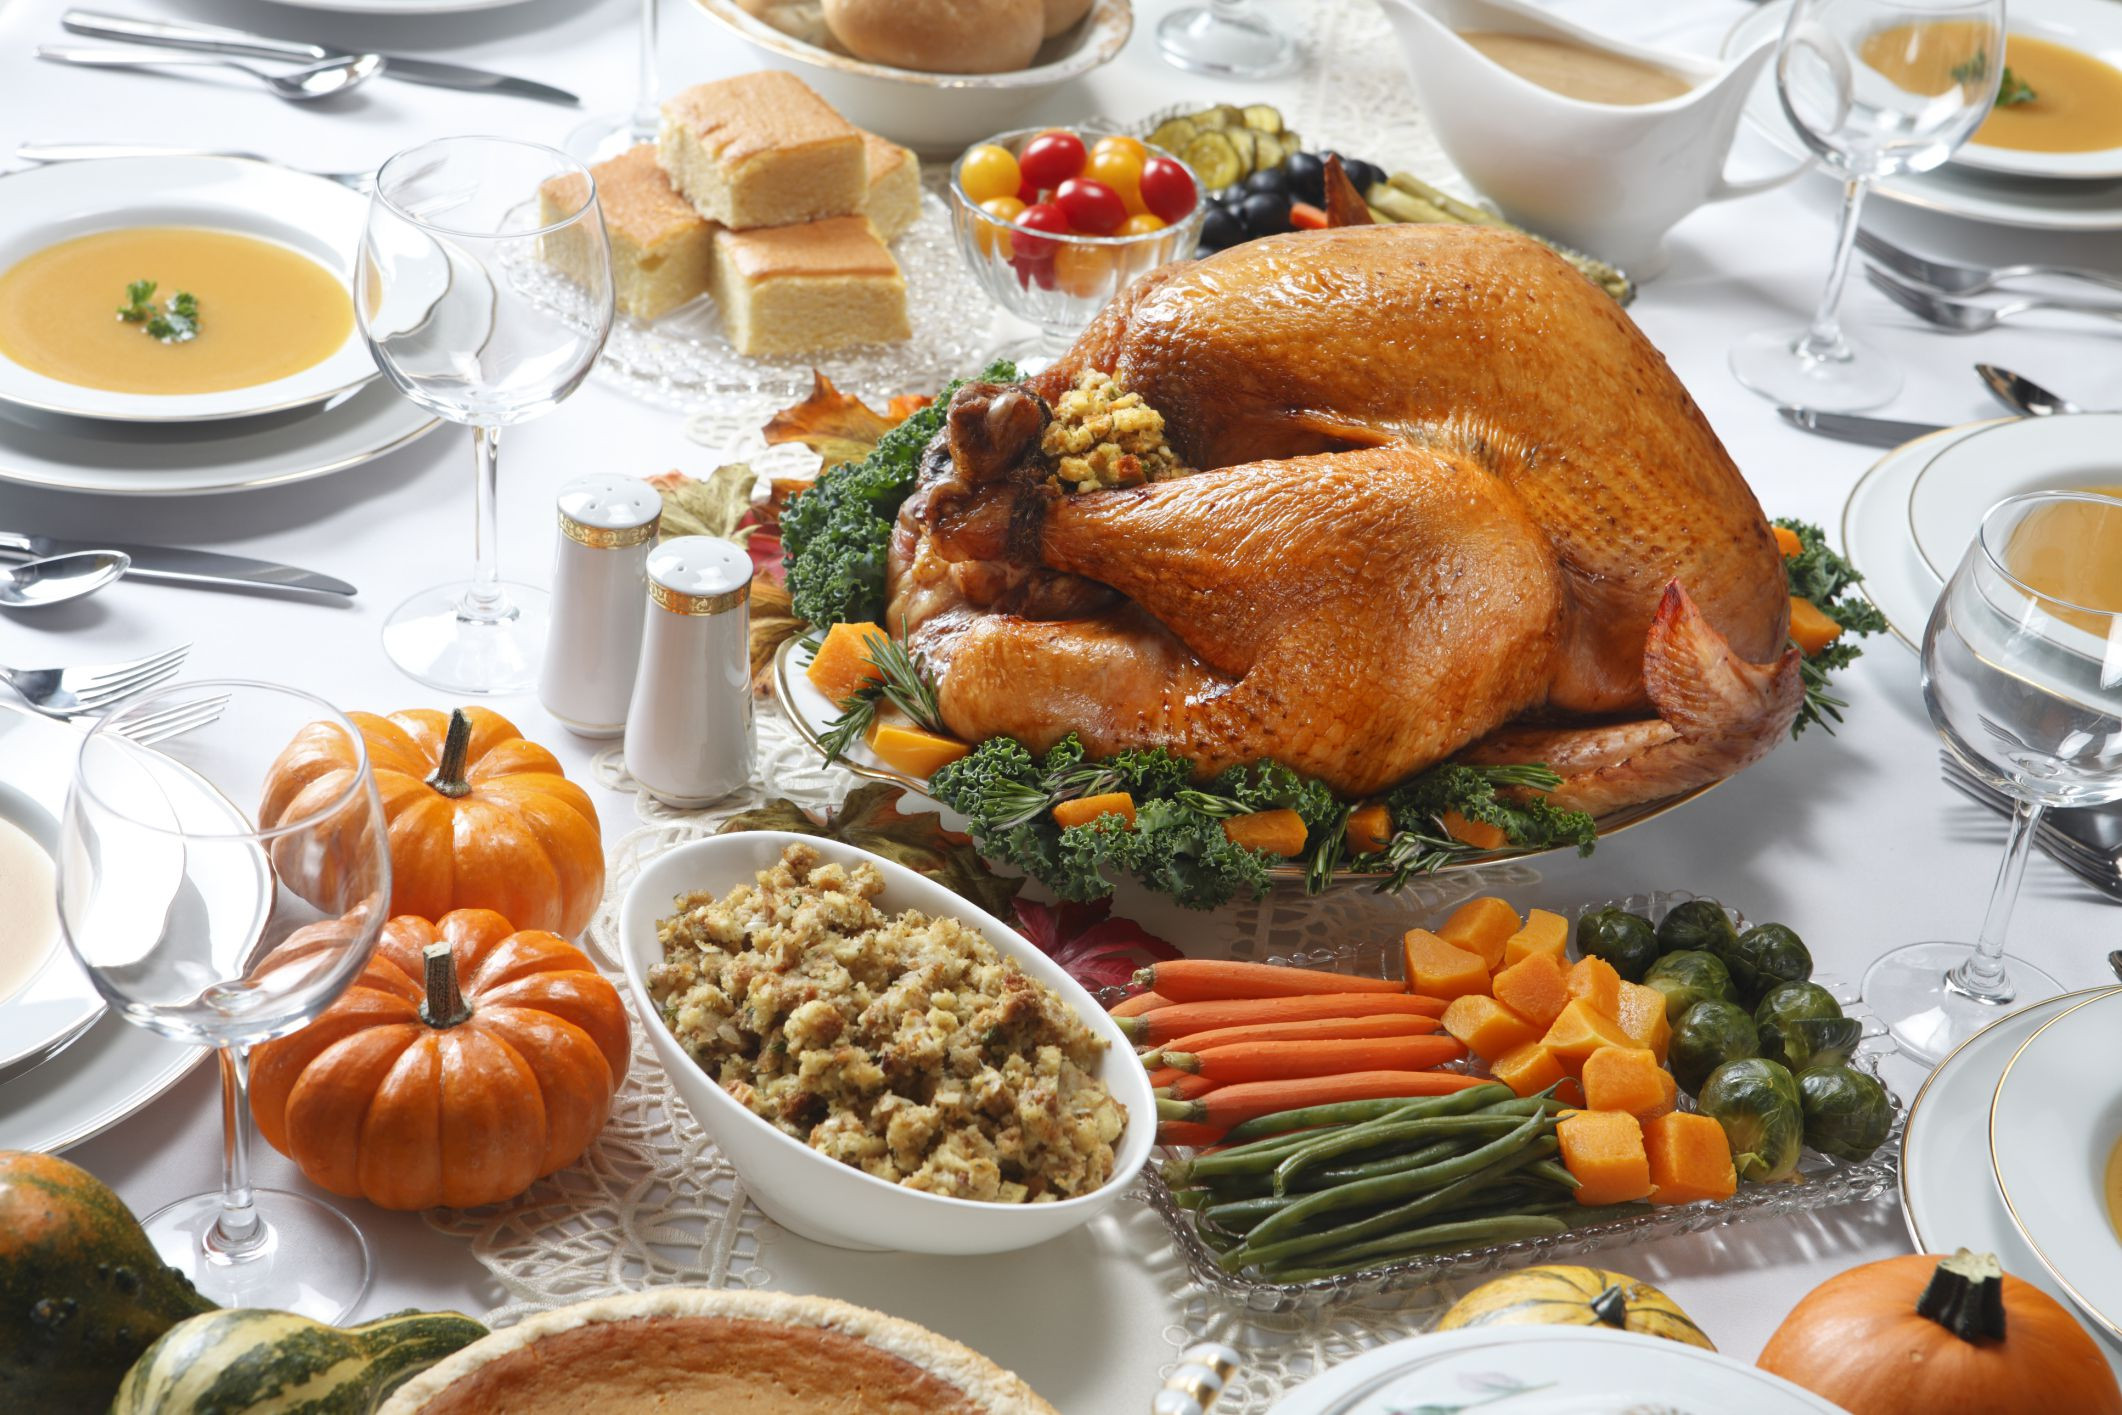 Typical Thanksgiving Food
 How to Make a Traditional Thanksgiving Meal Gluten Free